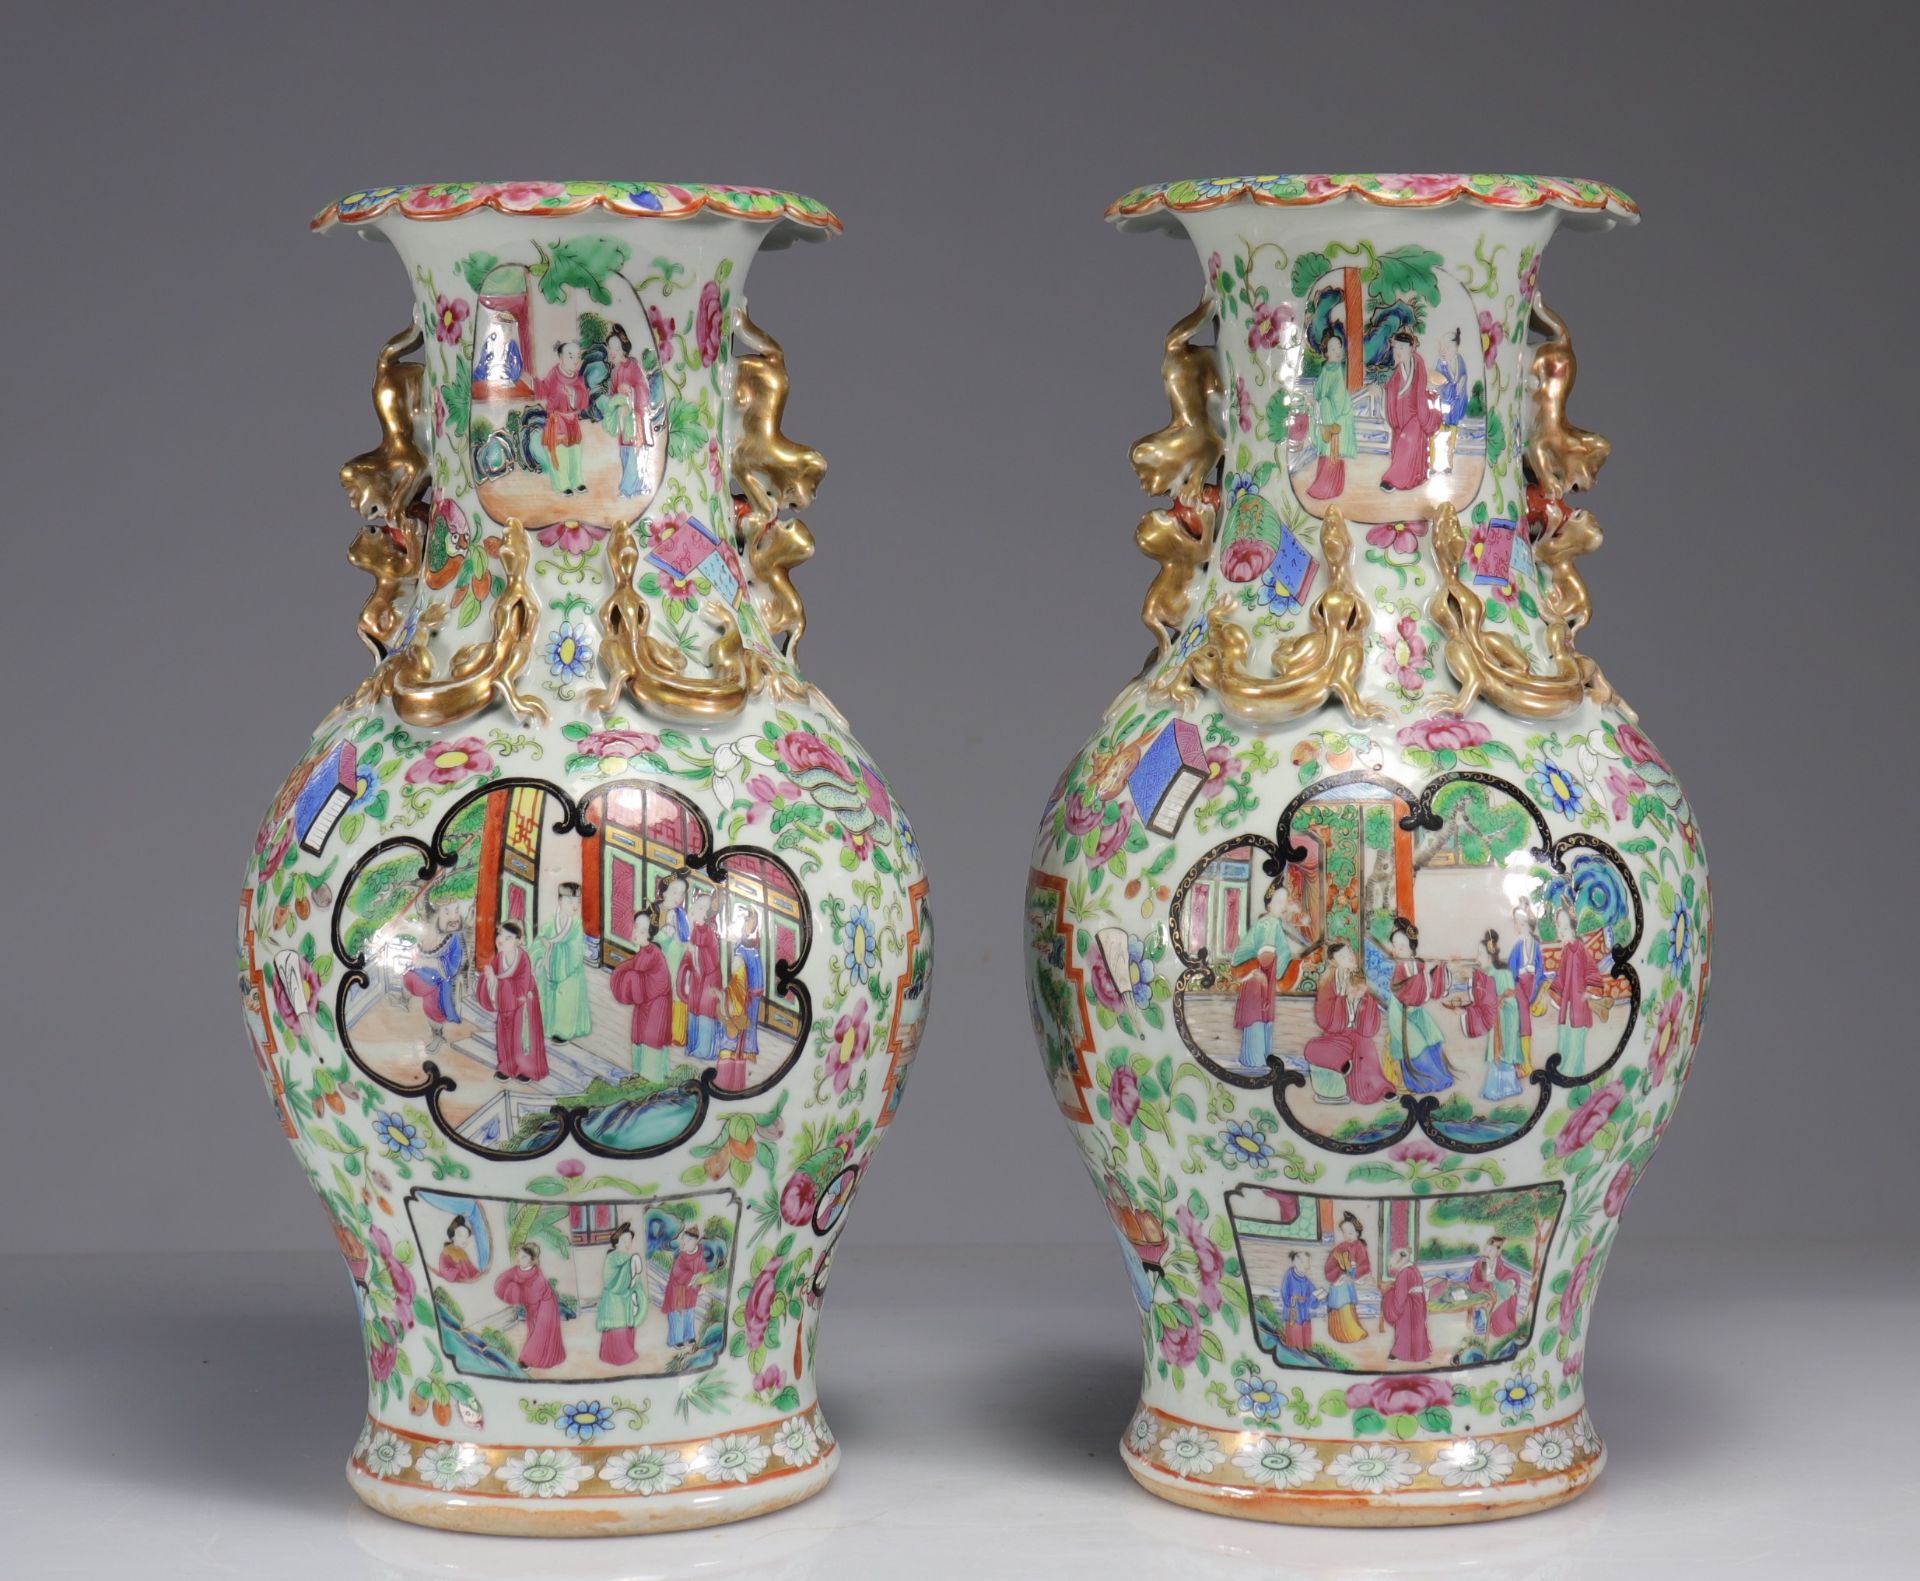 Pair of 19th century Canton porcelain vases - Image 3 of 6